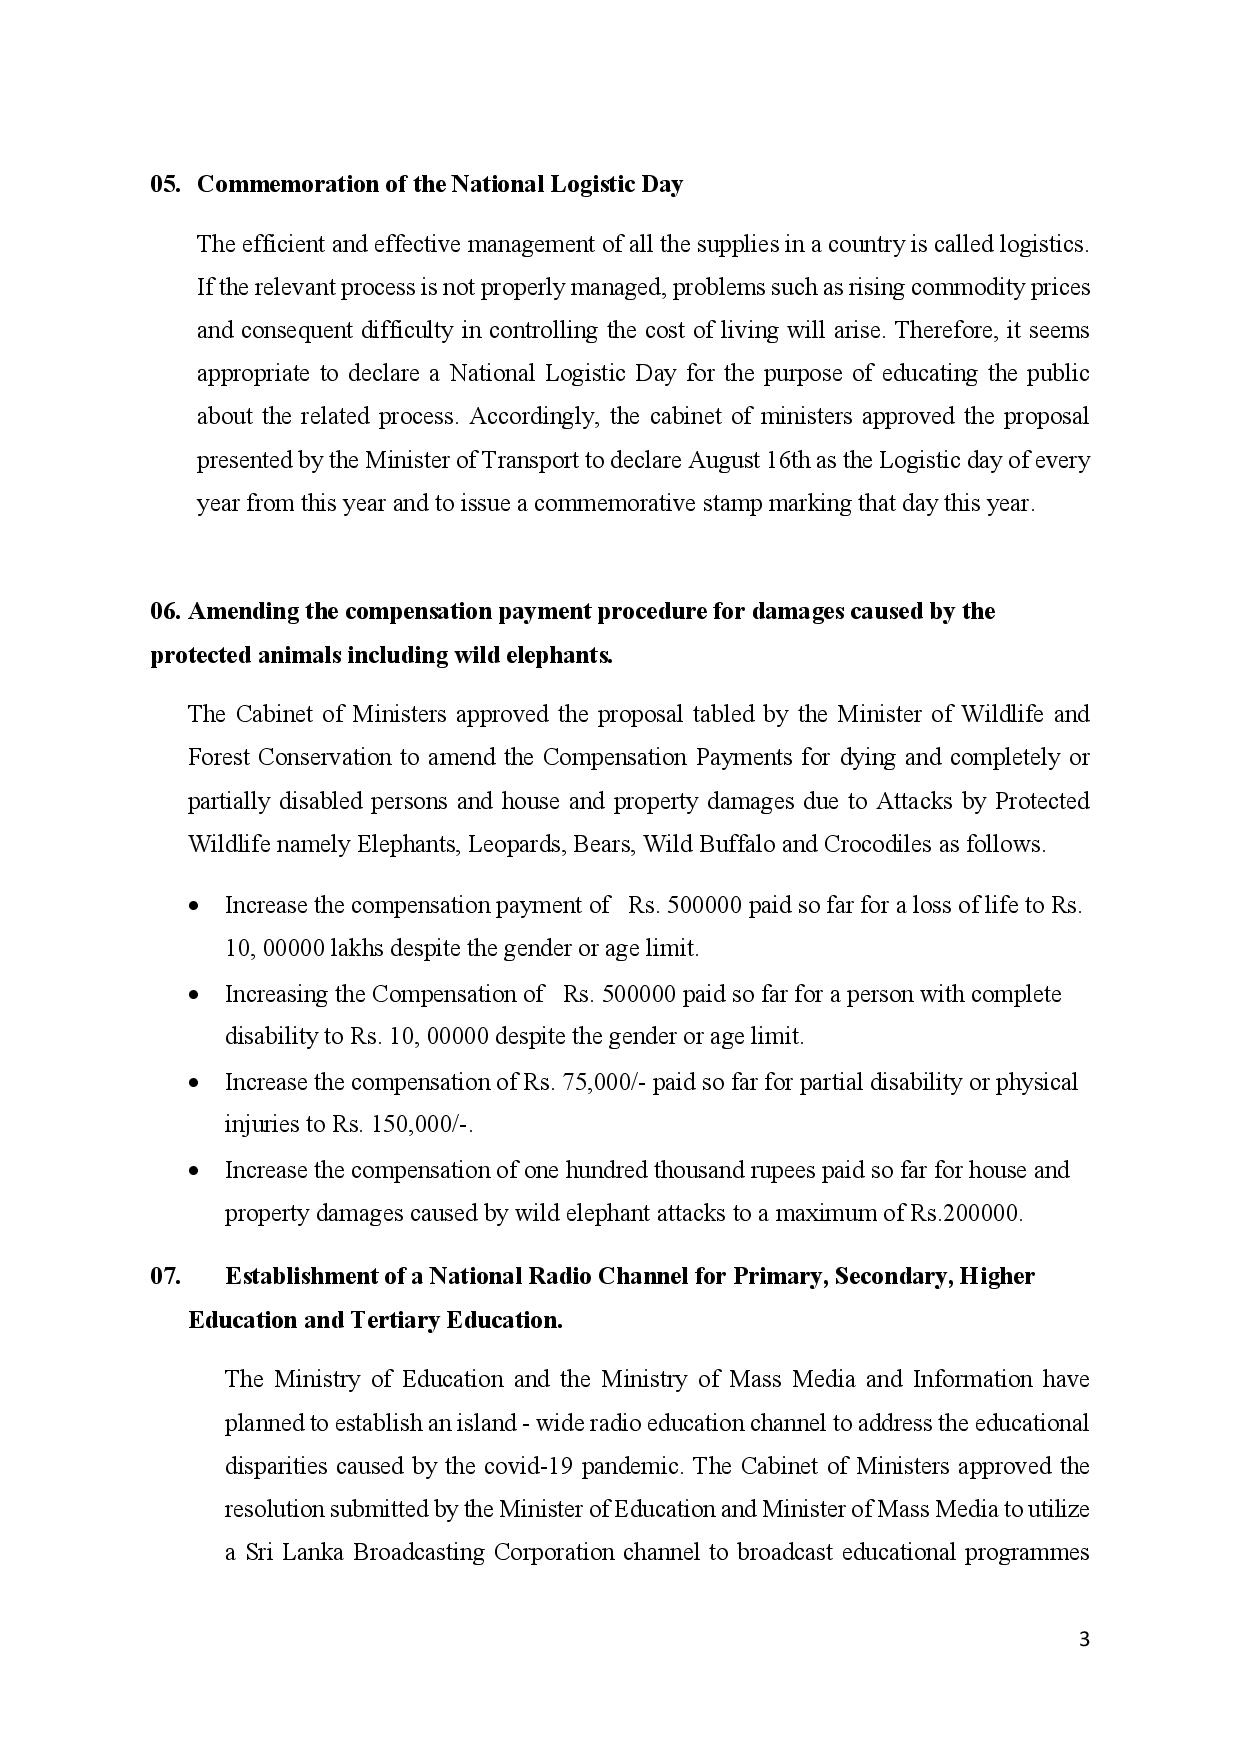 Cabinet Decisions on 02.08.2021 English page 003